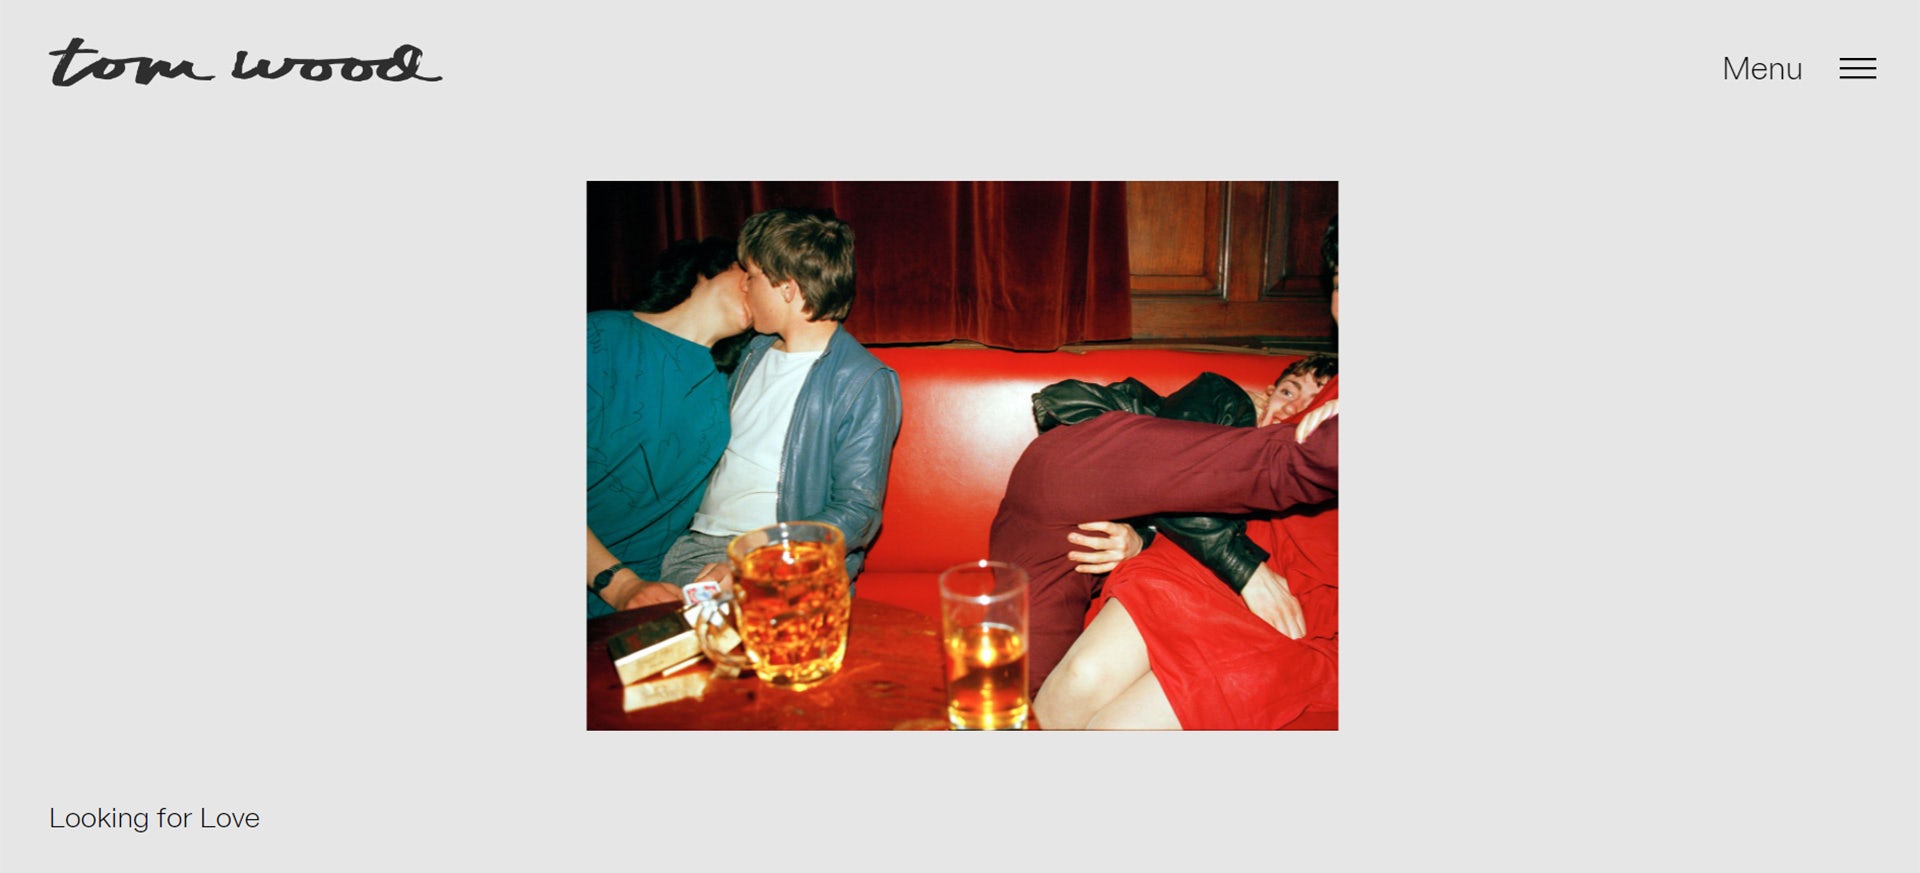 Homepage of Tom Wood's archive website, featuring a photograph of couples kissing in a bar